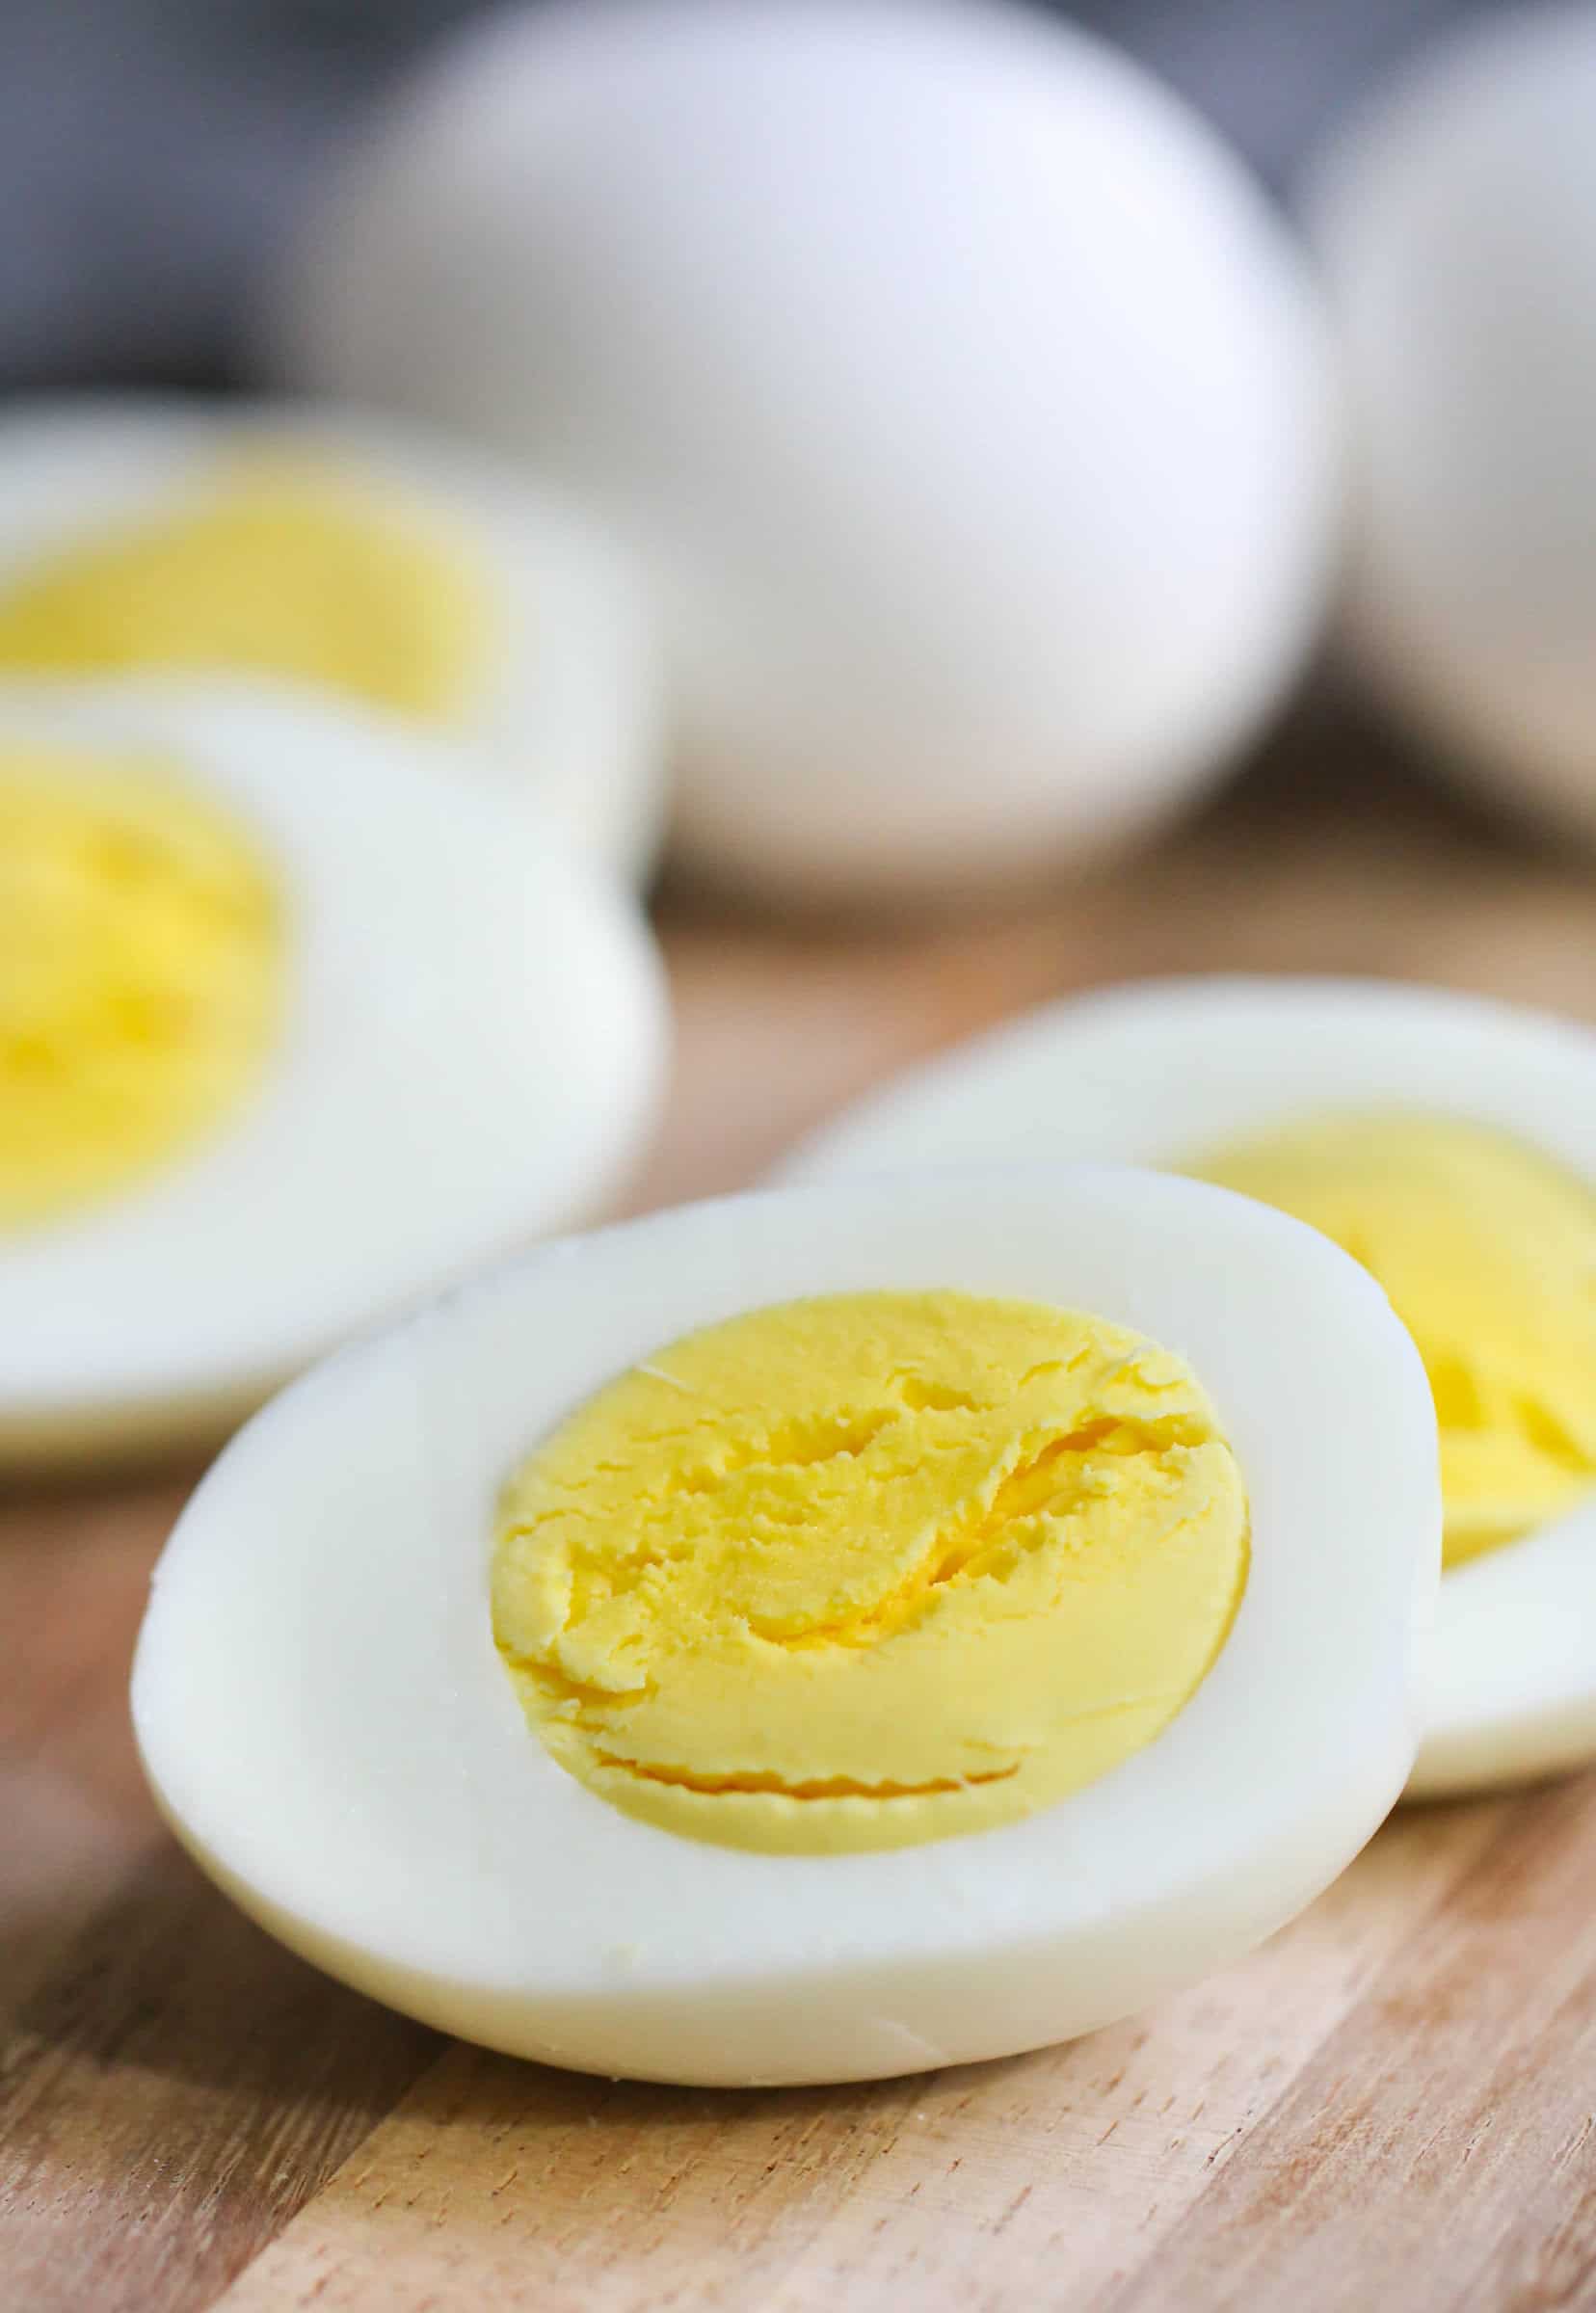 How to Make Hard Boiled Eggs in a Pressure Cooker without a Basket